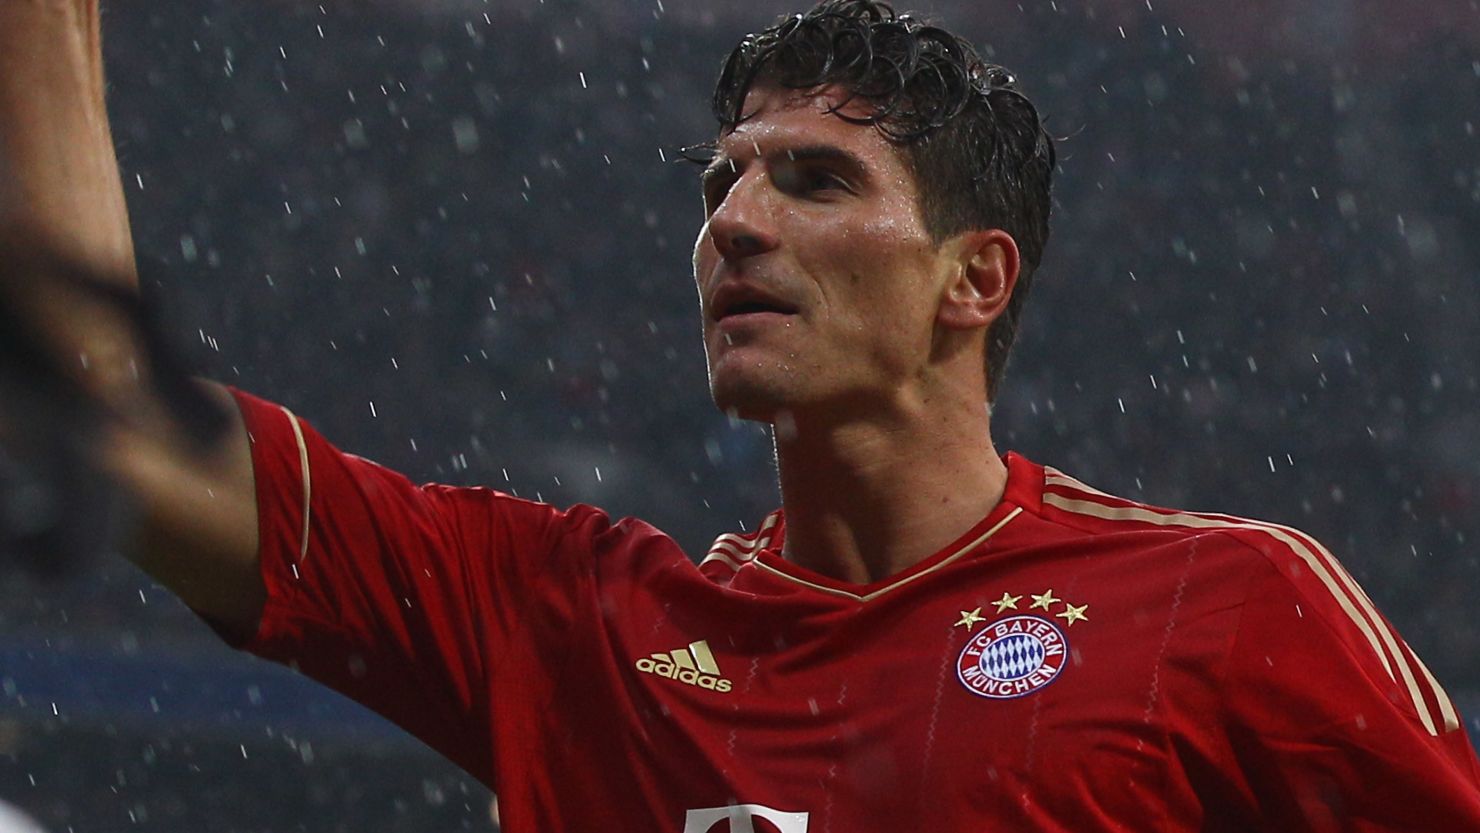 Mario Gomez celebrates his goal for Bayern Munich in their 2-1 home win over Hanover.